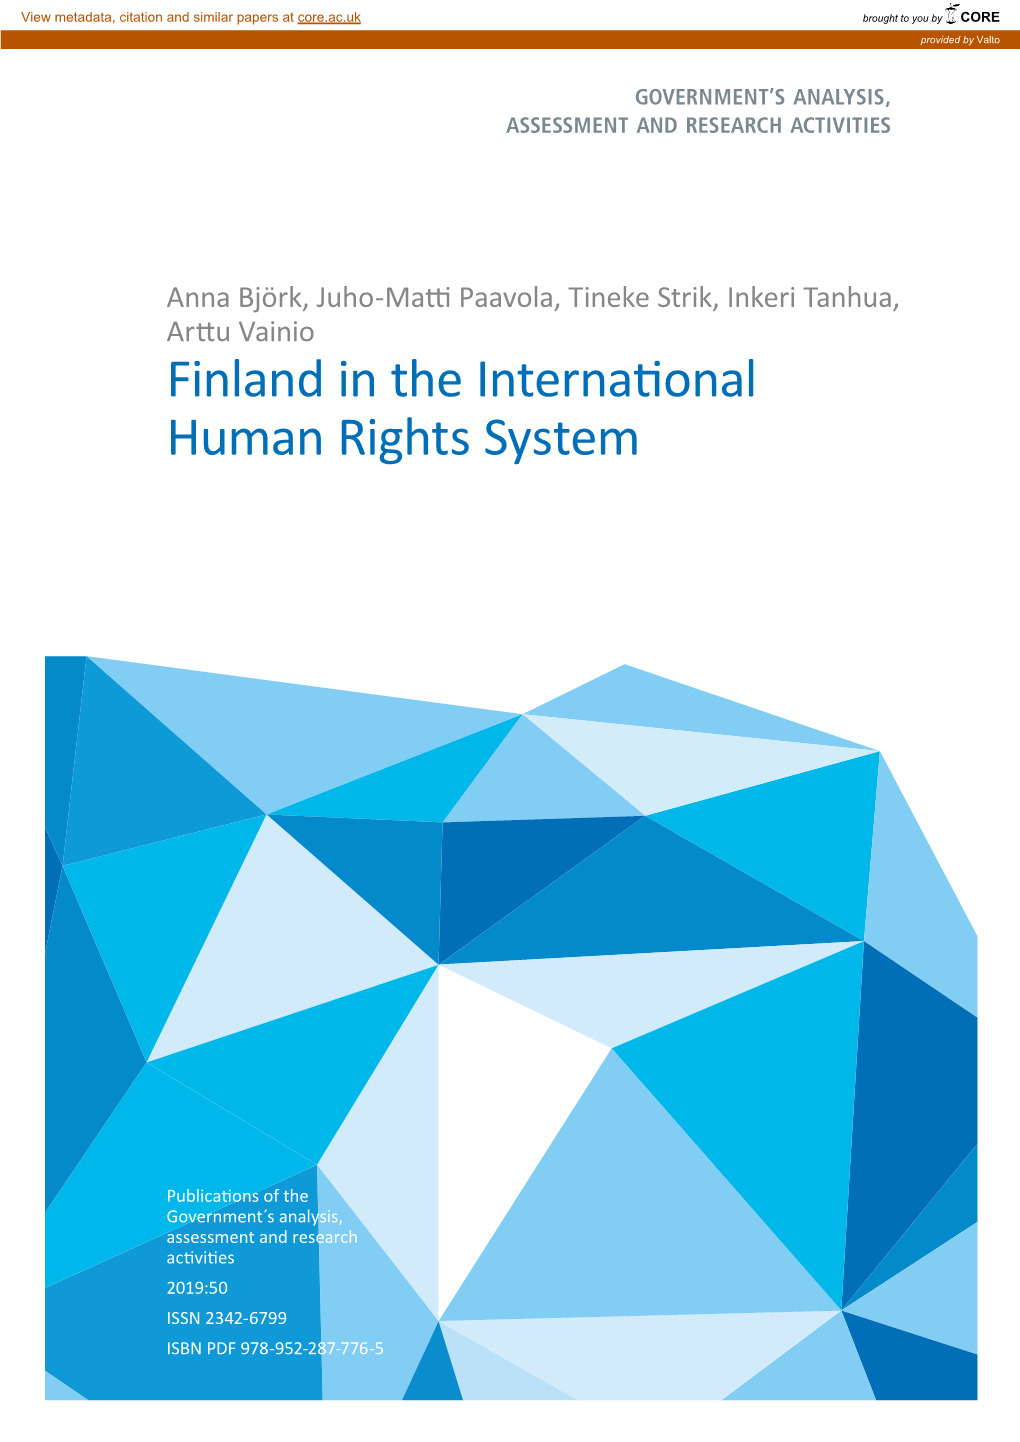 Finland in the International Human Rights System